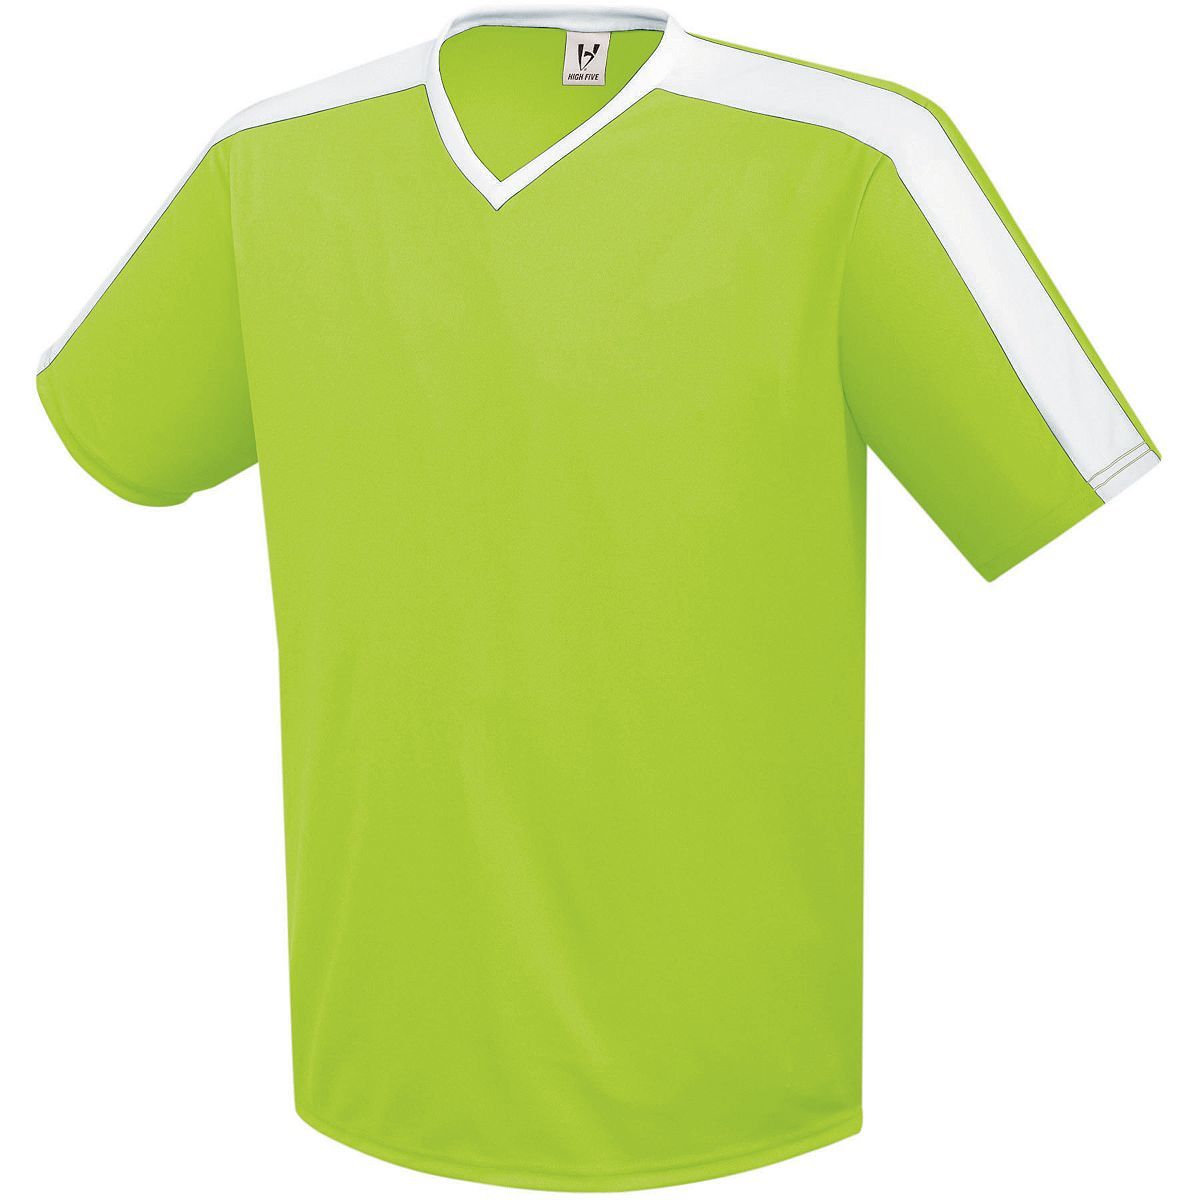 High 5 Youth Genesis Soccer Jersey in Lime/White  -Part of the Youth, Youth-Jersey, High5-Products, Soccer, Shirts, All-Sports-1 product lines at KanaleyCreations.com